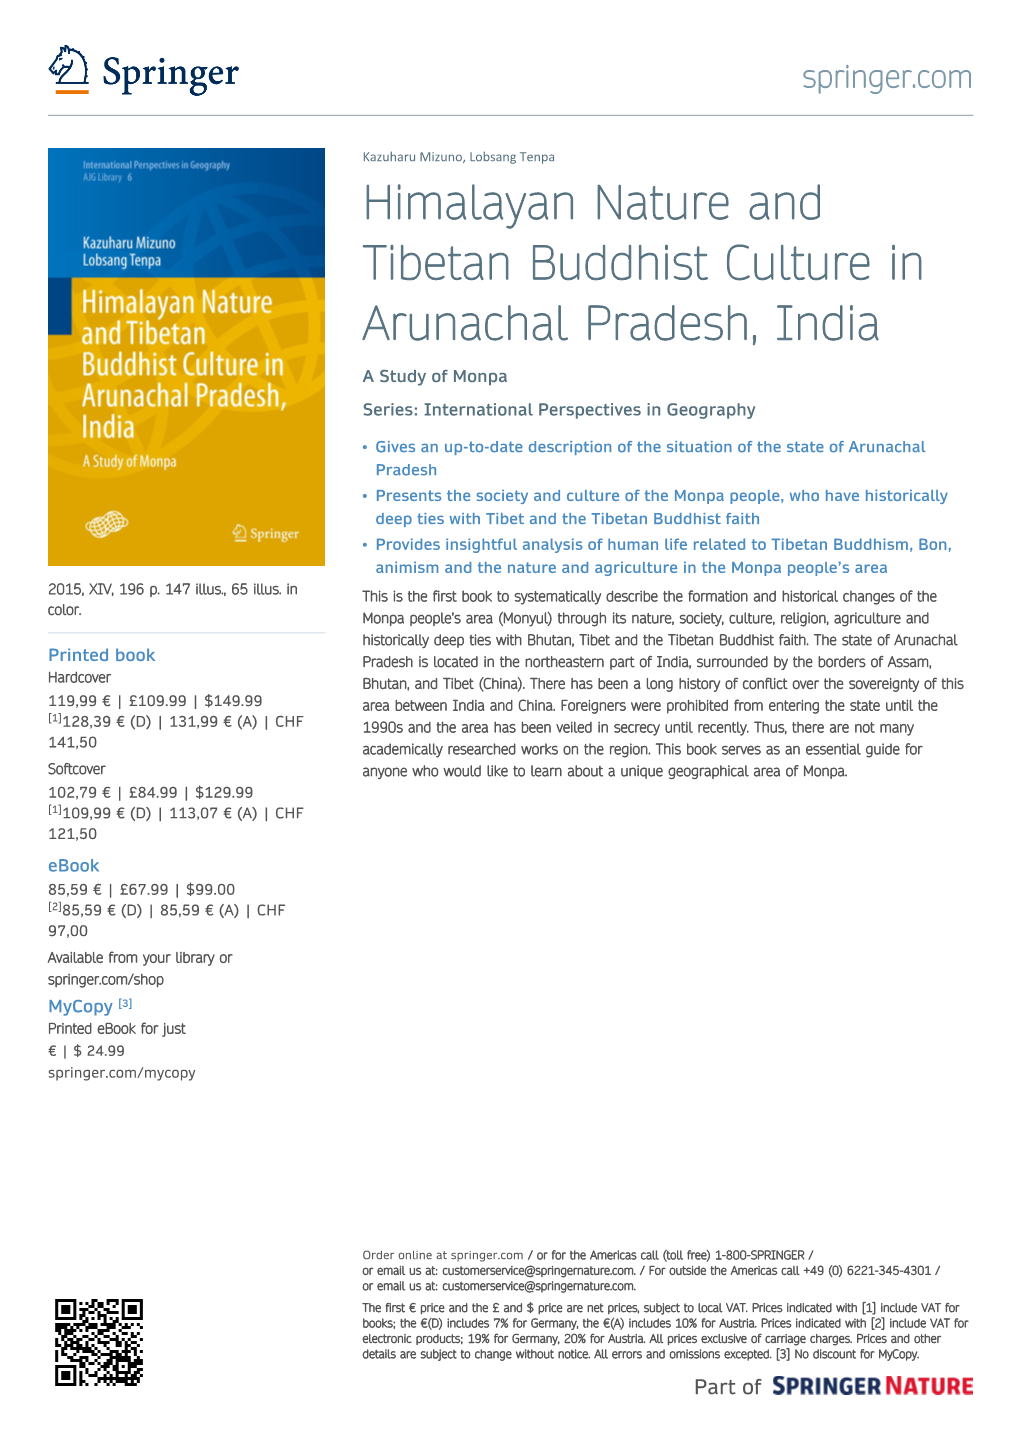 Himalayan Nature and Tibetan Buddhist Culture in Arunachal Pradesh, India a Study of Monpa Series: International Perspectives in Geography